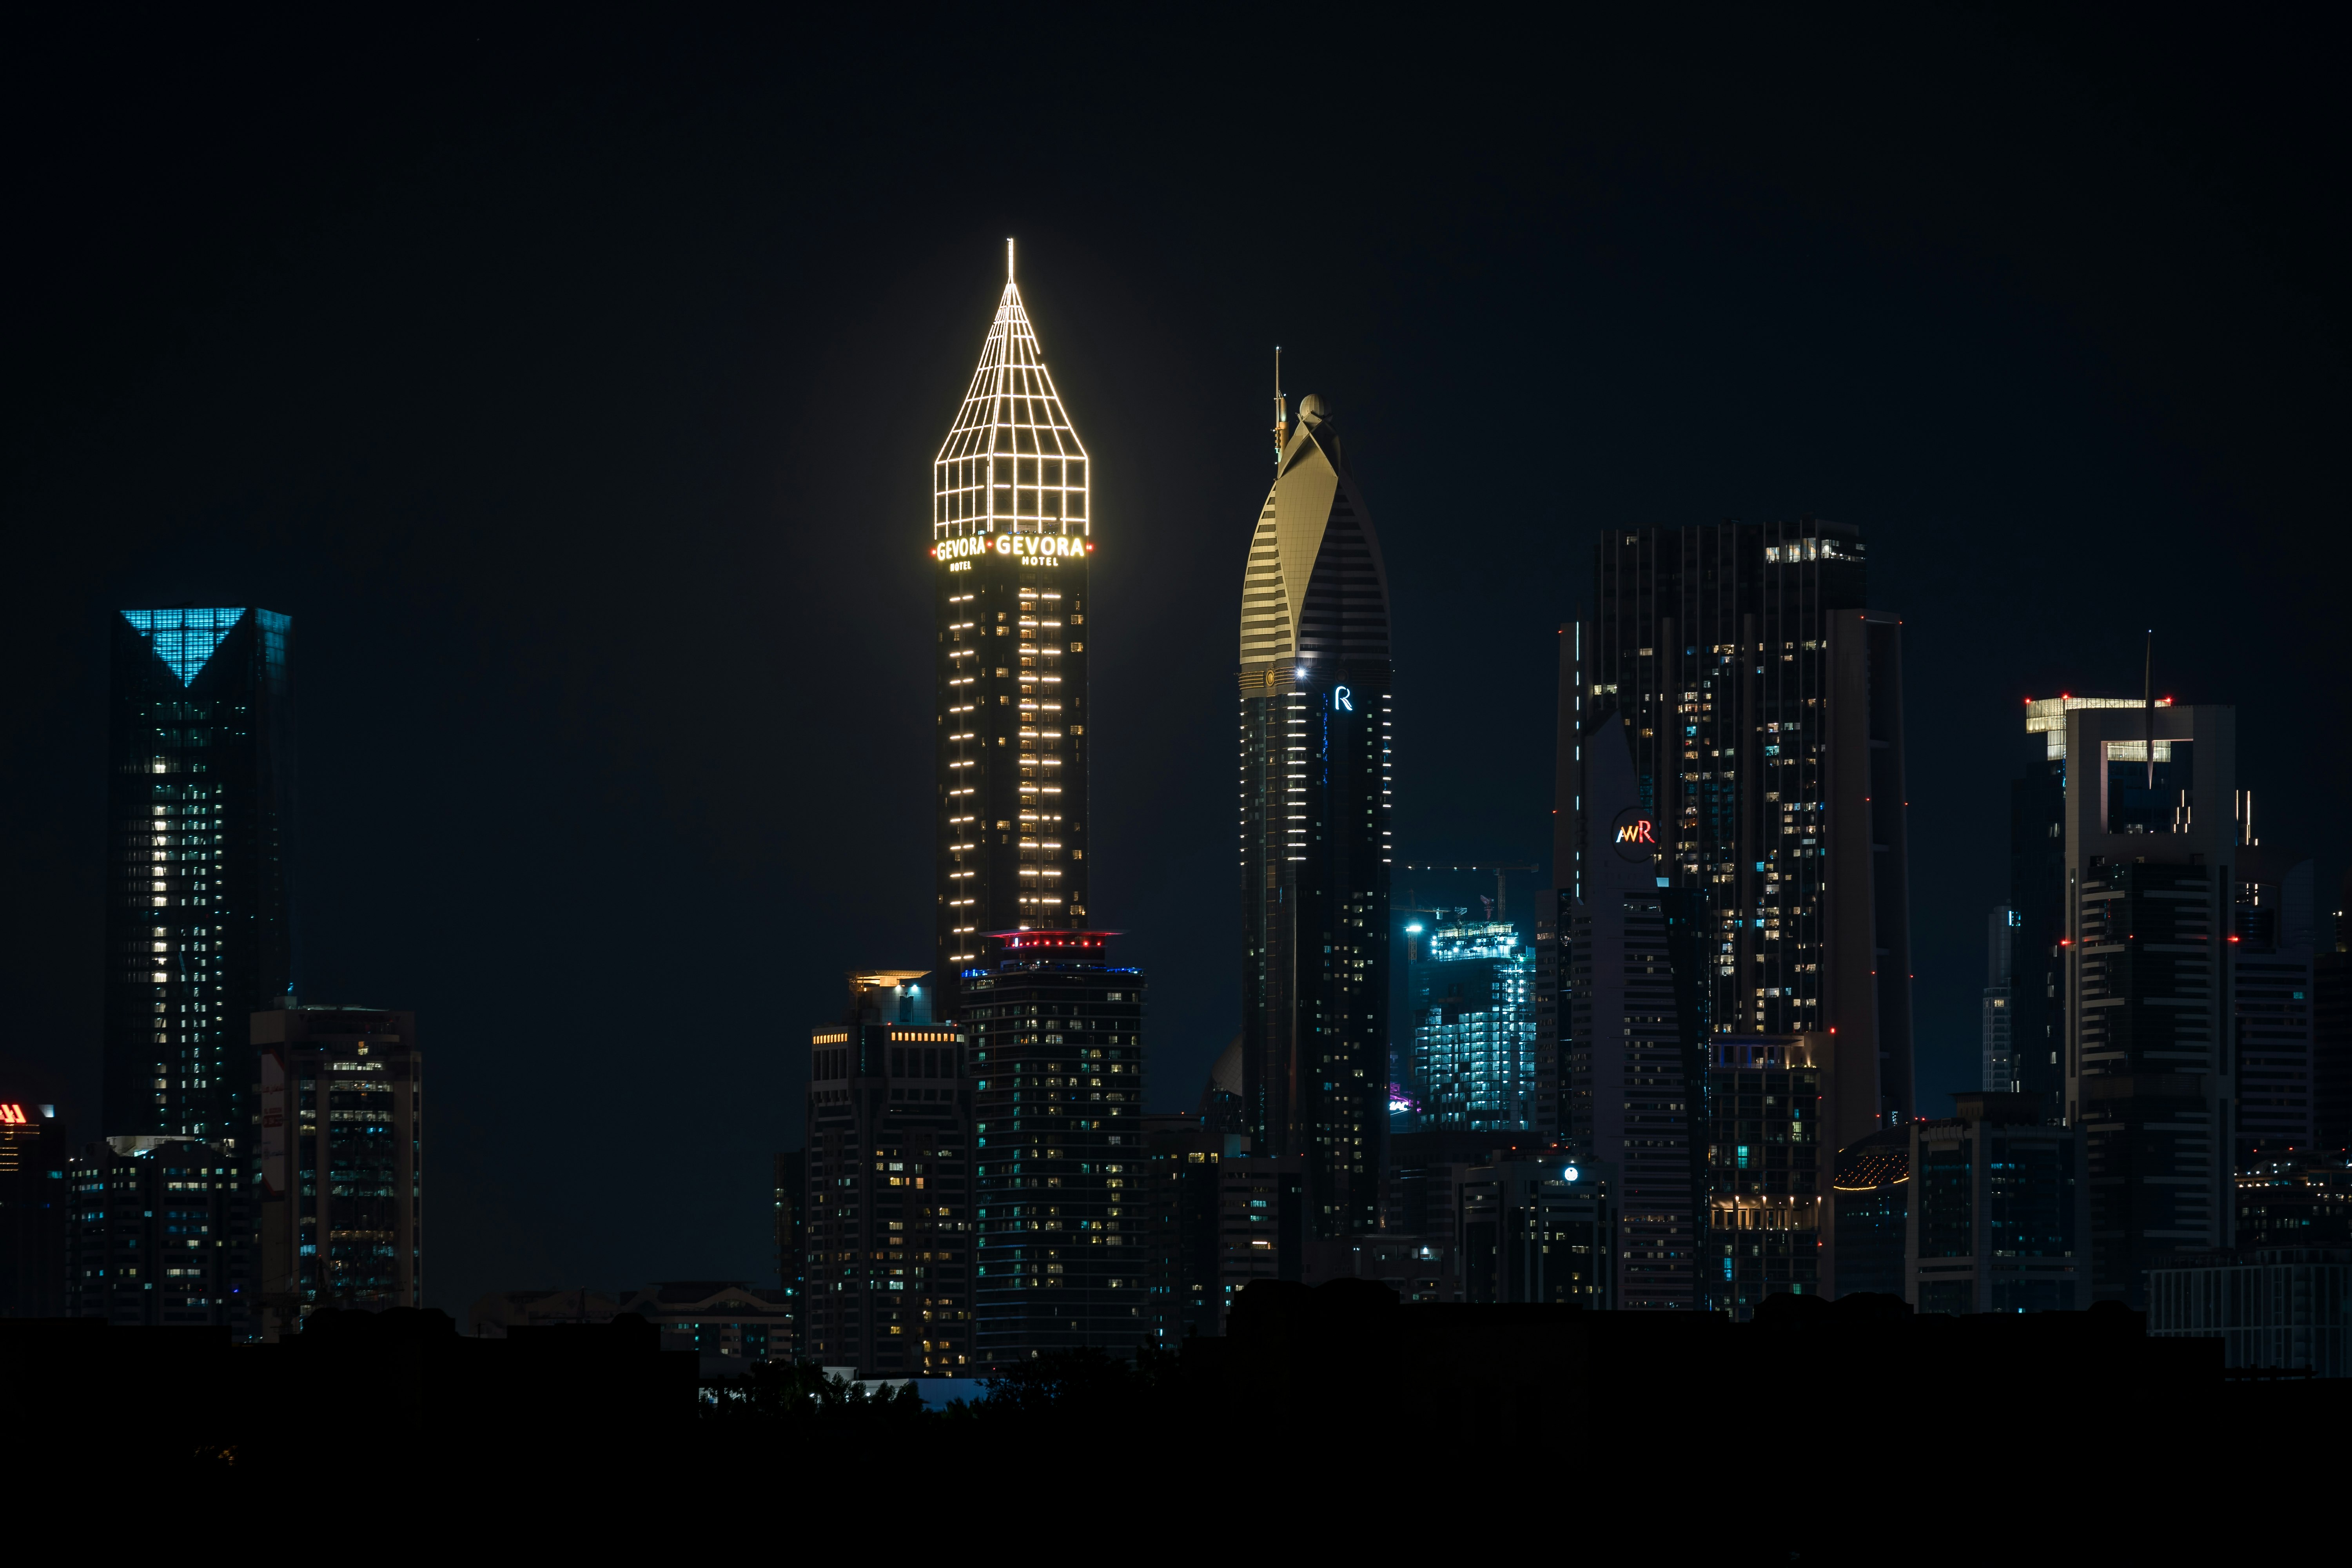 high rise building during night time